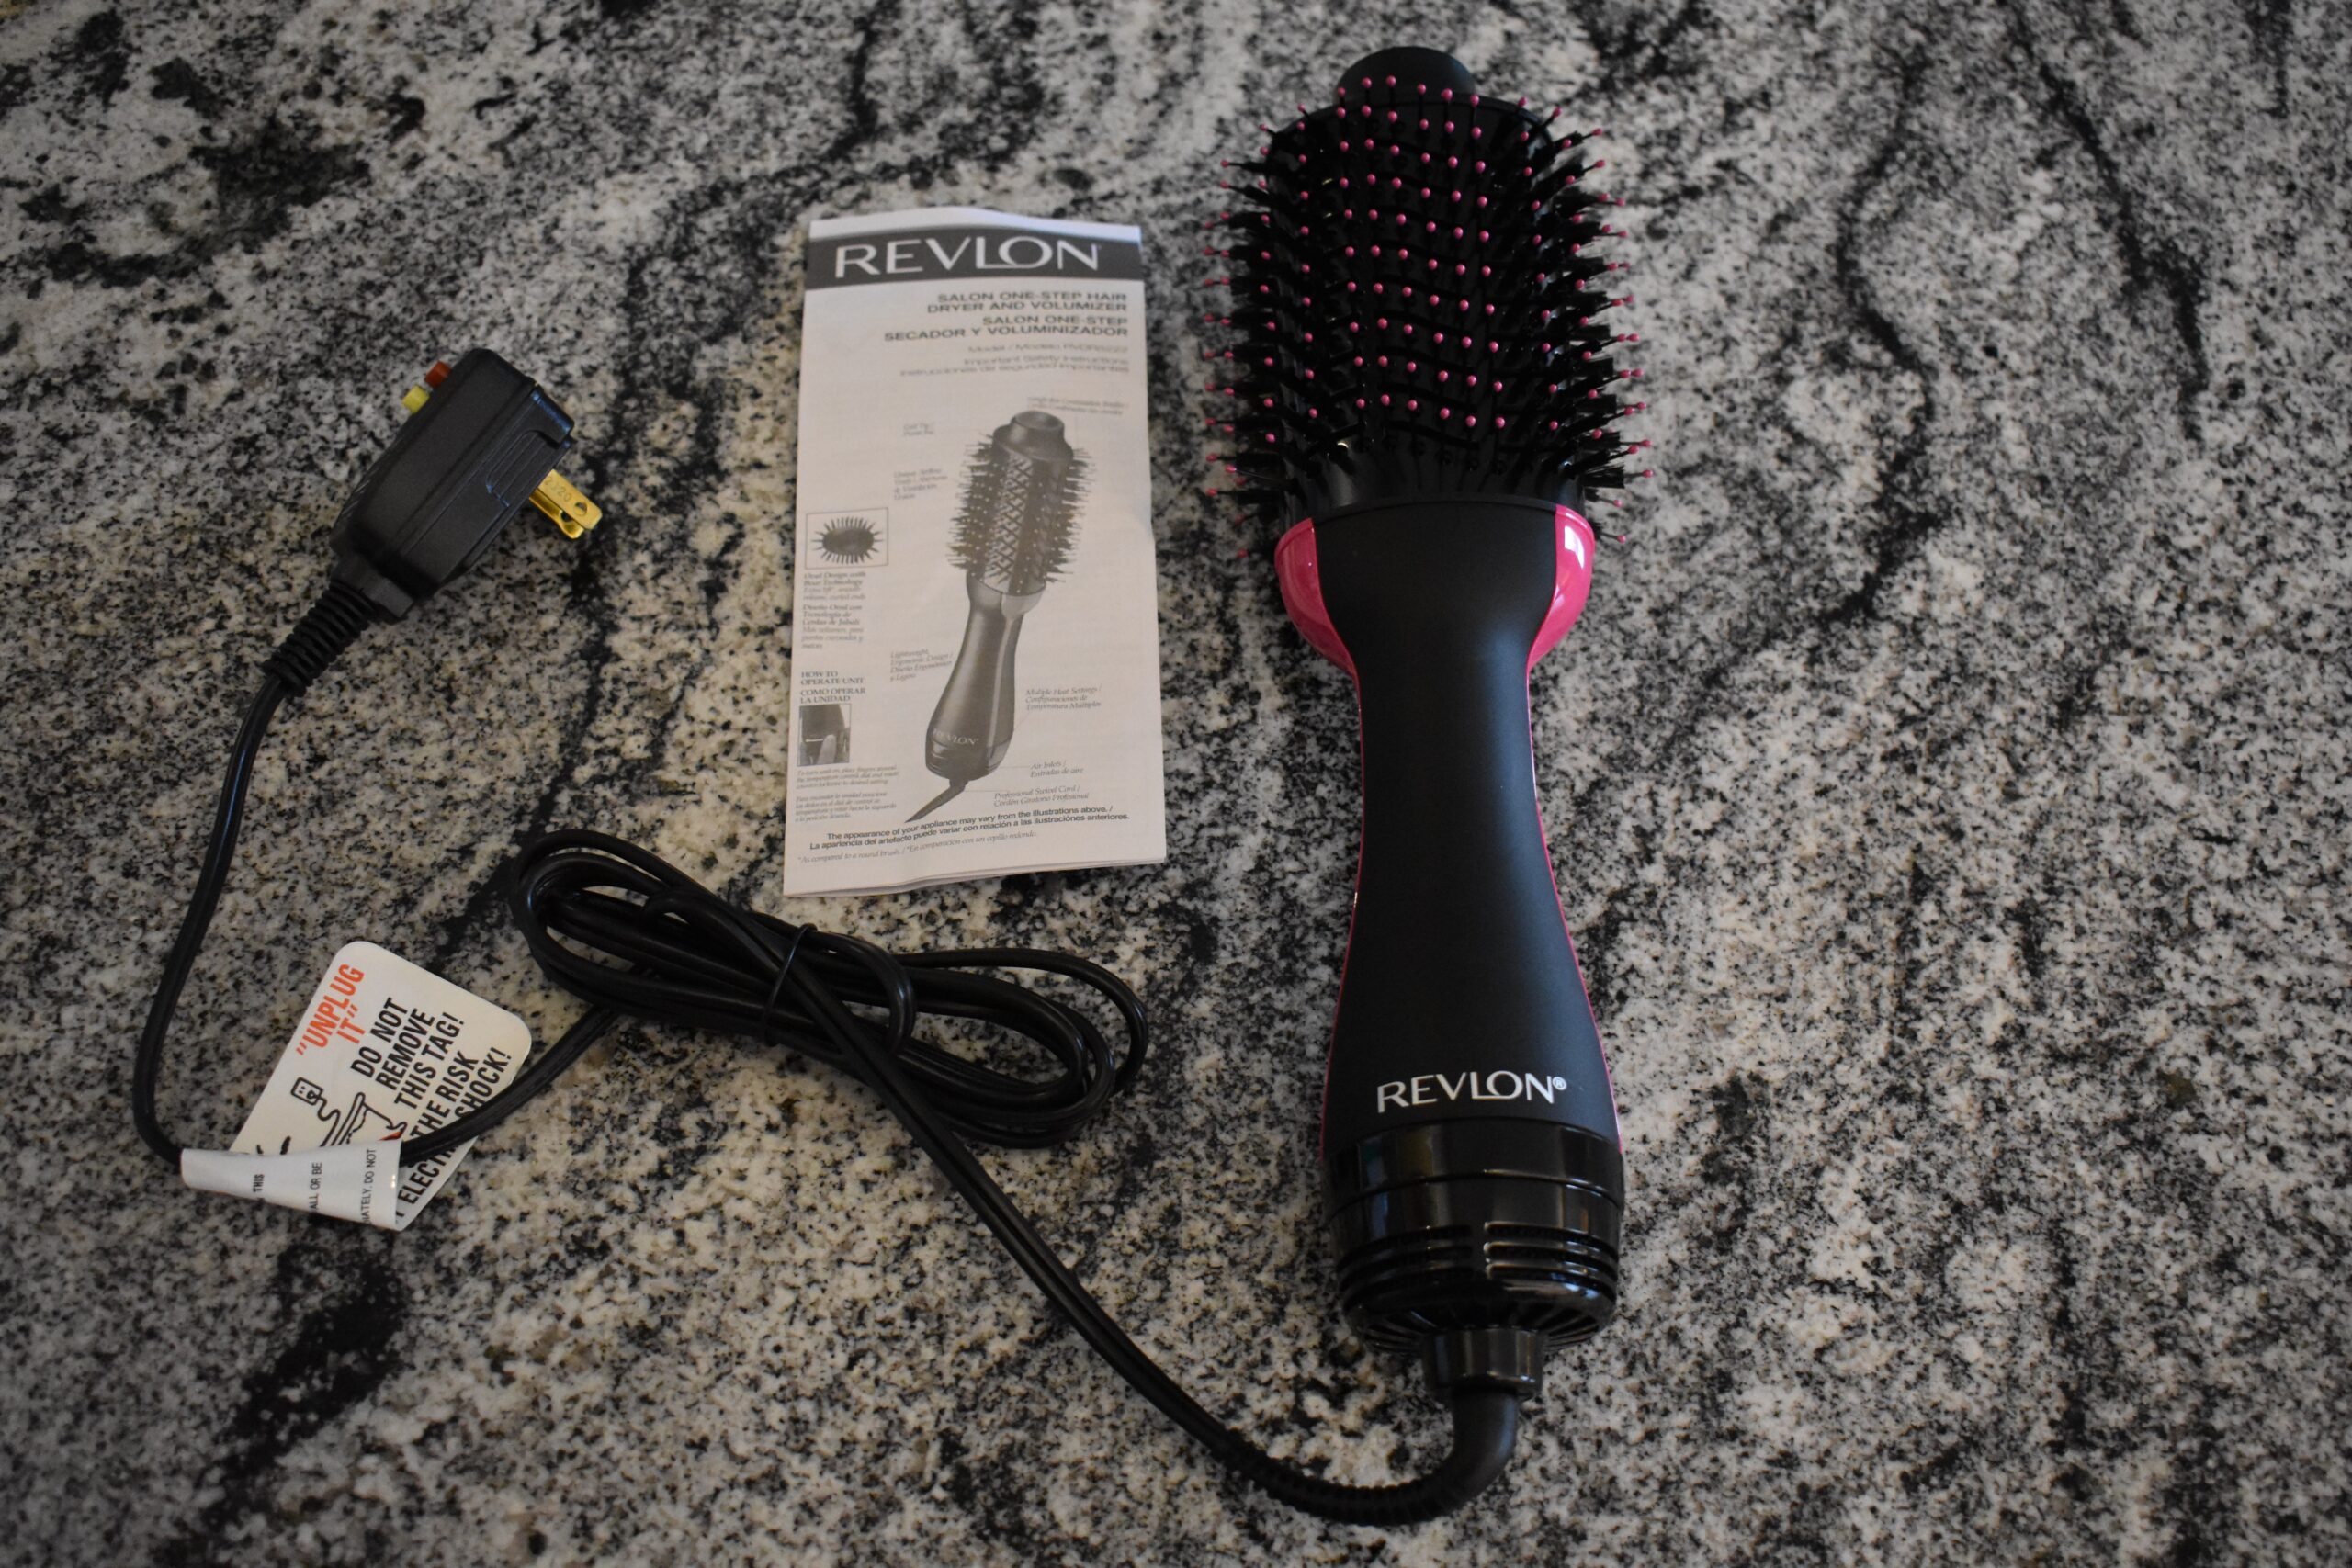 Revlon electric hair brush sits on the counter next to its cord and instructions